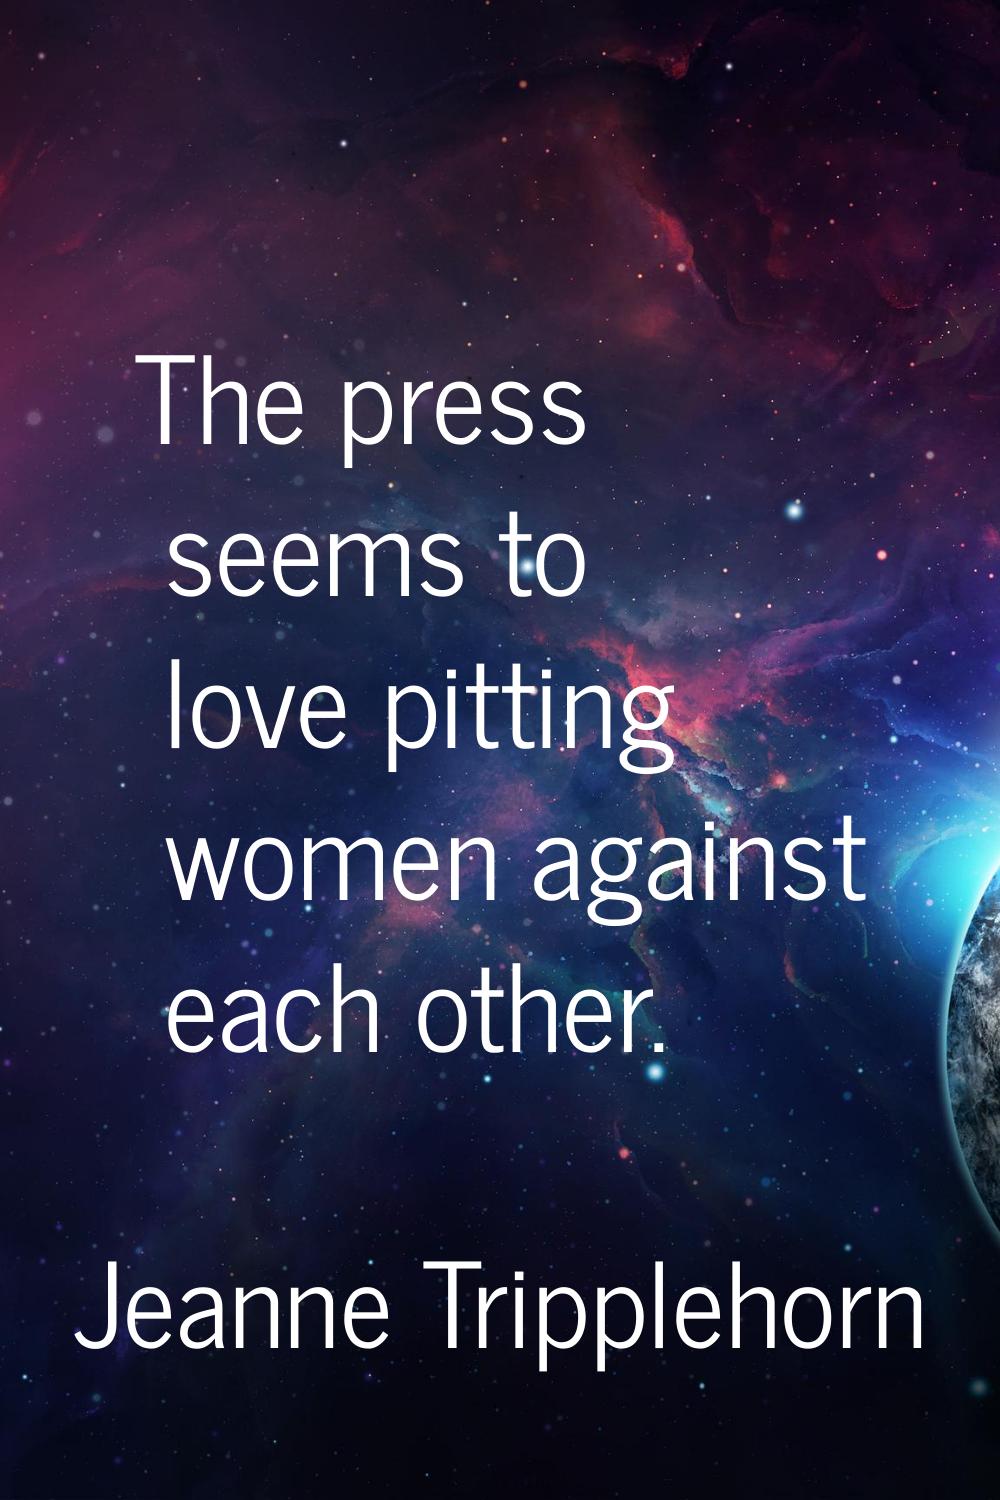 The press seems to love pitting women against each other.